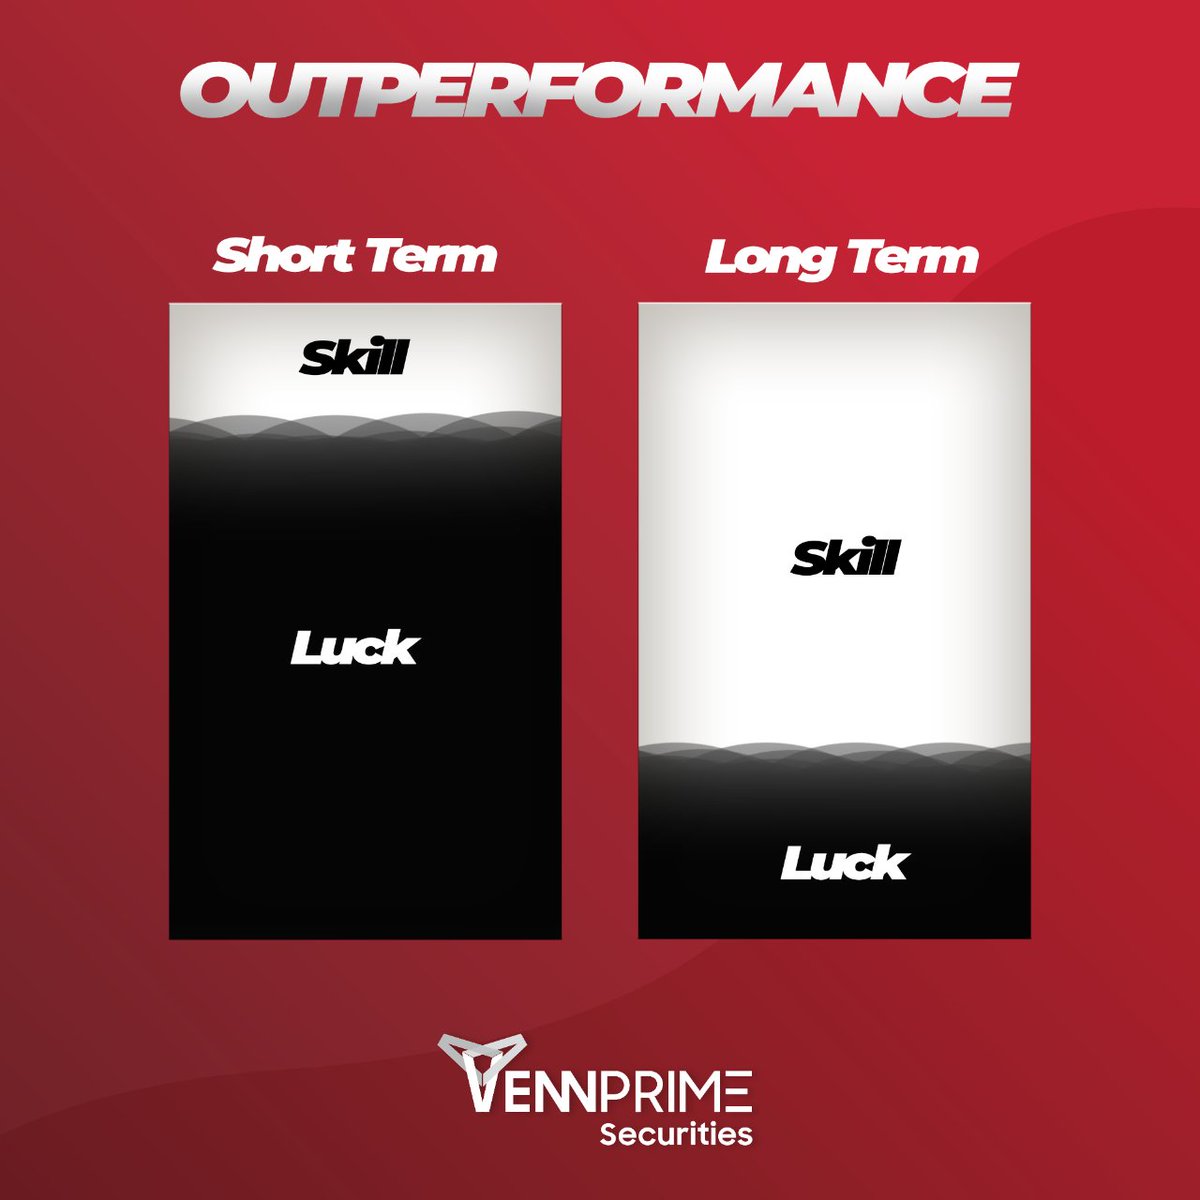 The differences between Short Term and Long Term ❗

#forex #forextrader #forexlife #fx #motivation #motivational #philippines #fxtrading #cryptocurrency #crypto #nft #bitcoin #etherum #altcoin